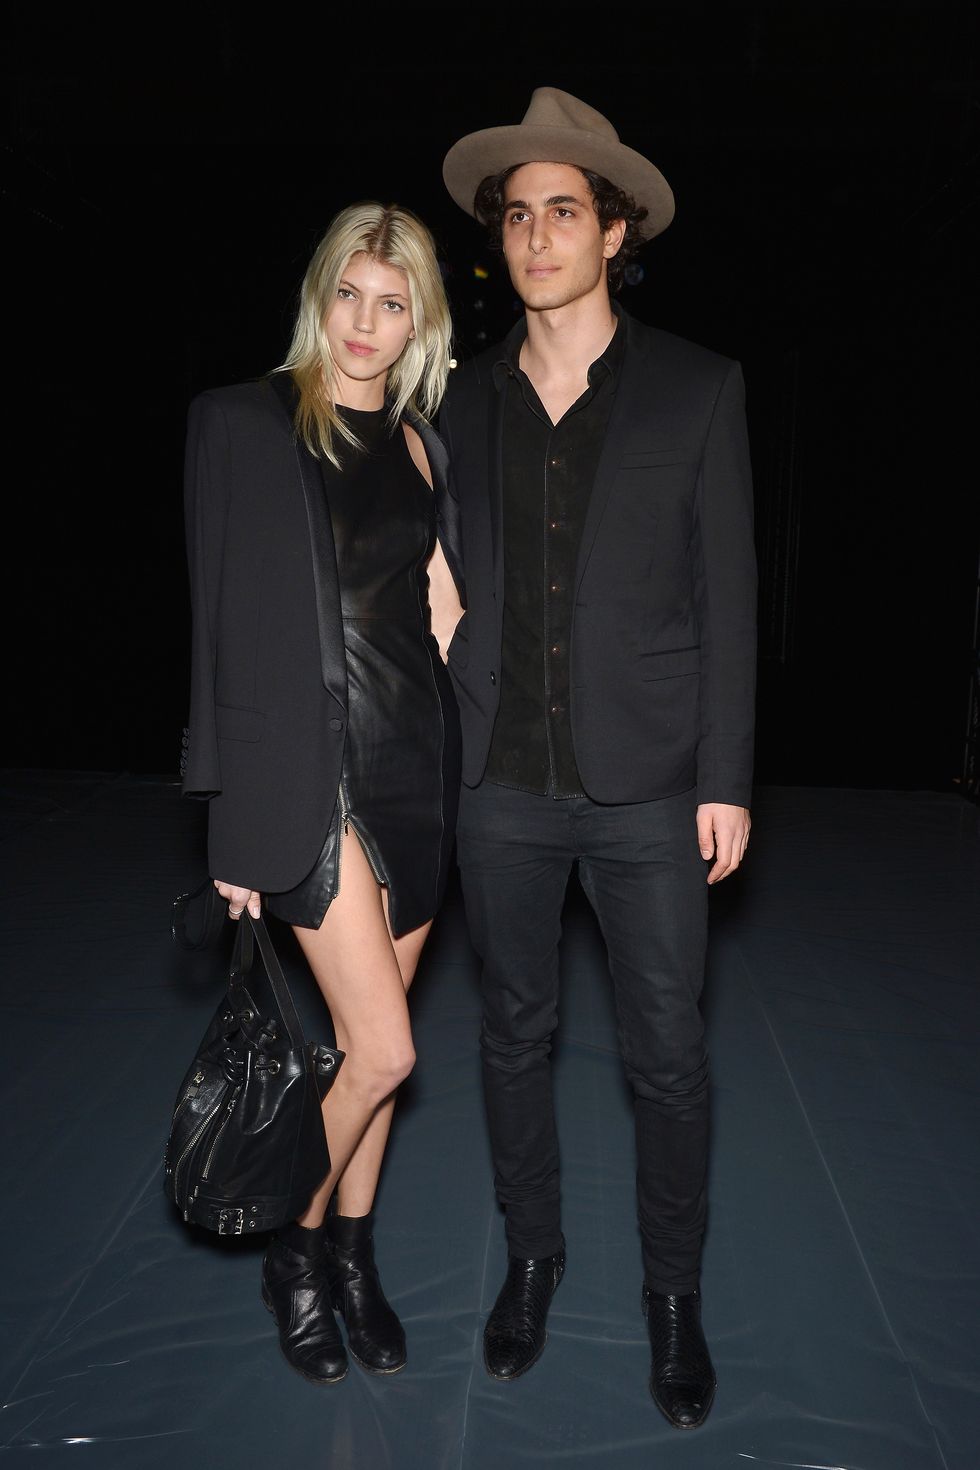 PARIS, FRANCE - MARCH 09:  (L-R) Devon Windsor and Fai Khadra attend the Saint Laurent show as part of the Paris Fashion Week Womenswear Fall/Winter 2015/2016 on March 9, 2015 in Paris, France.  (Photo by Dominique Charriau/WireImage)